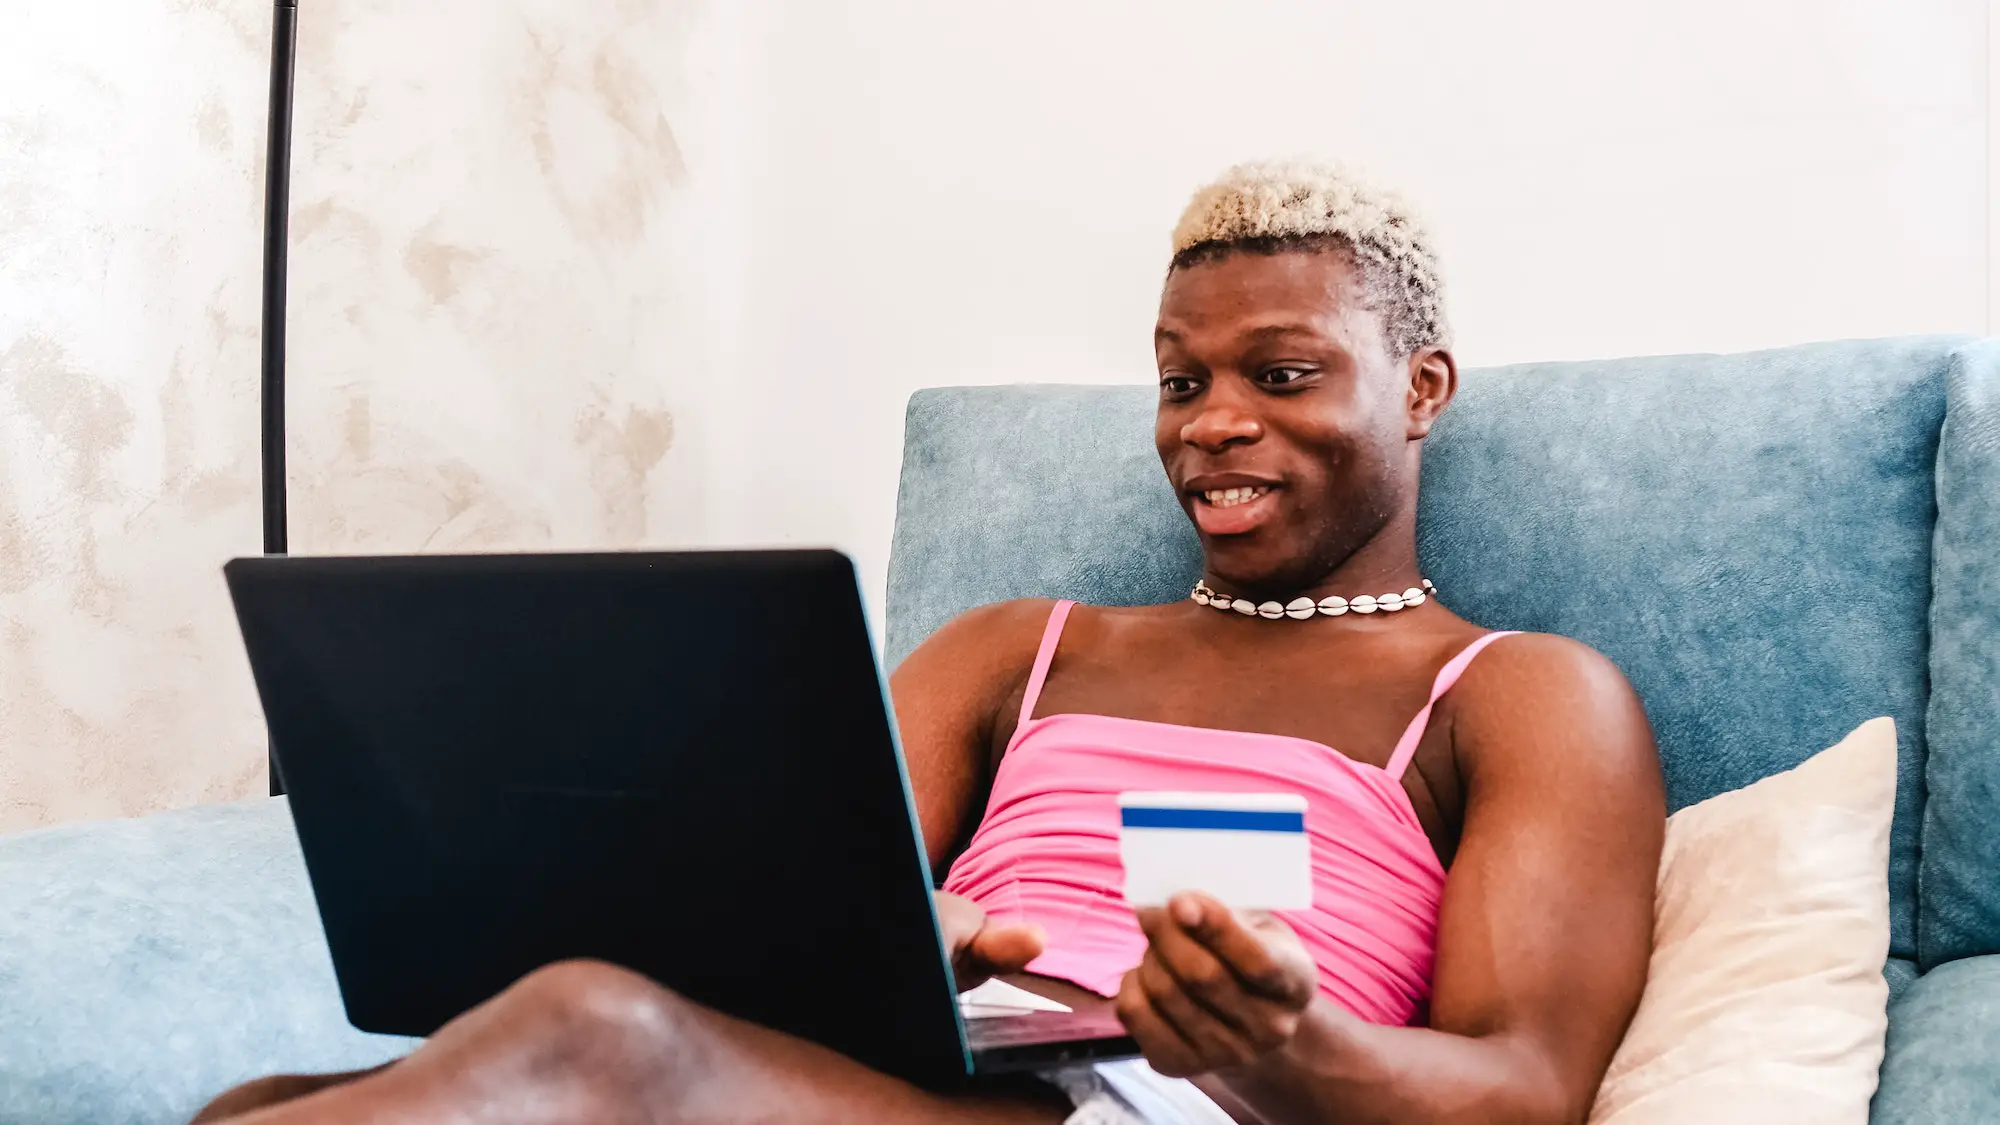 Black transsexual person making online purchases with credit card at home